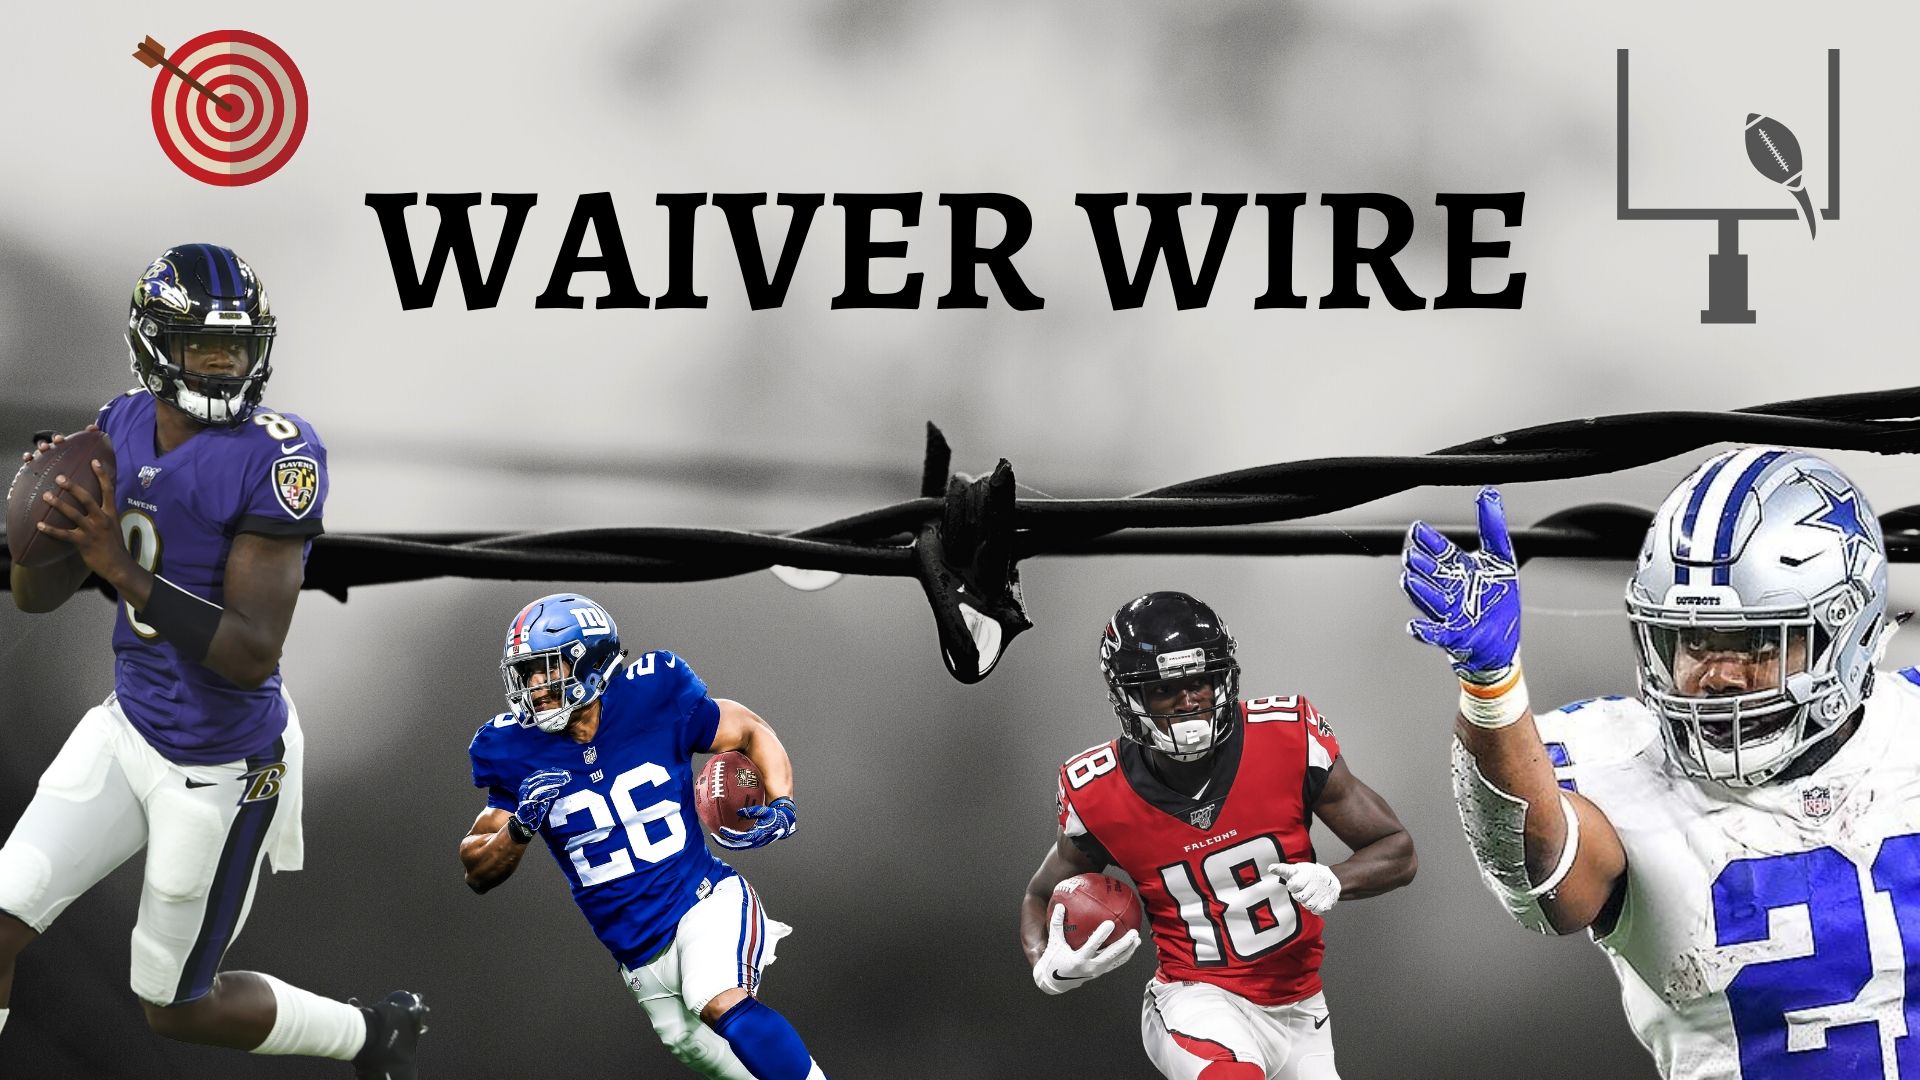 Waiver Wire